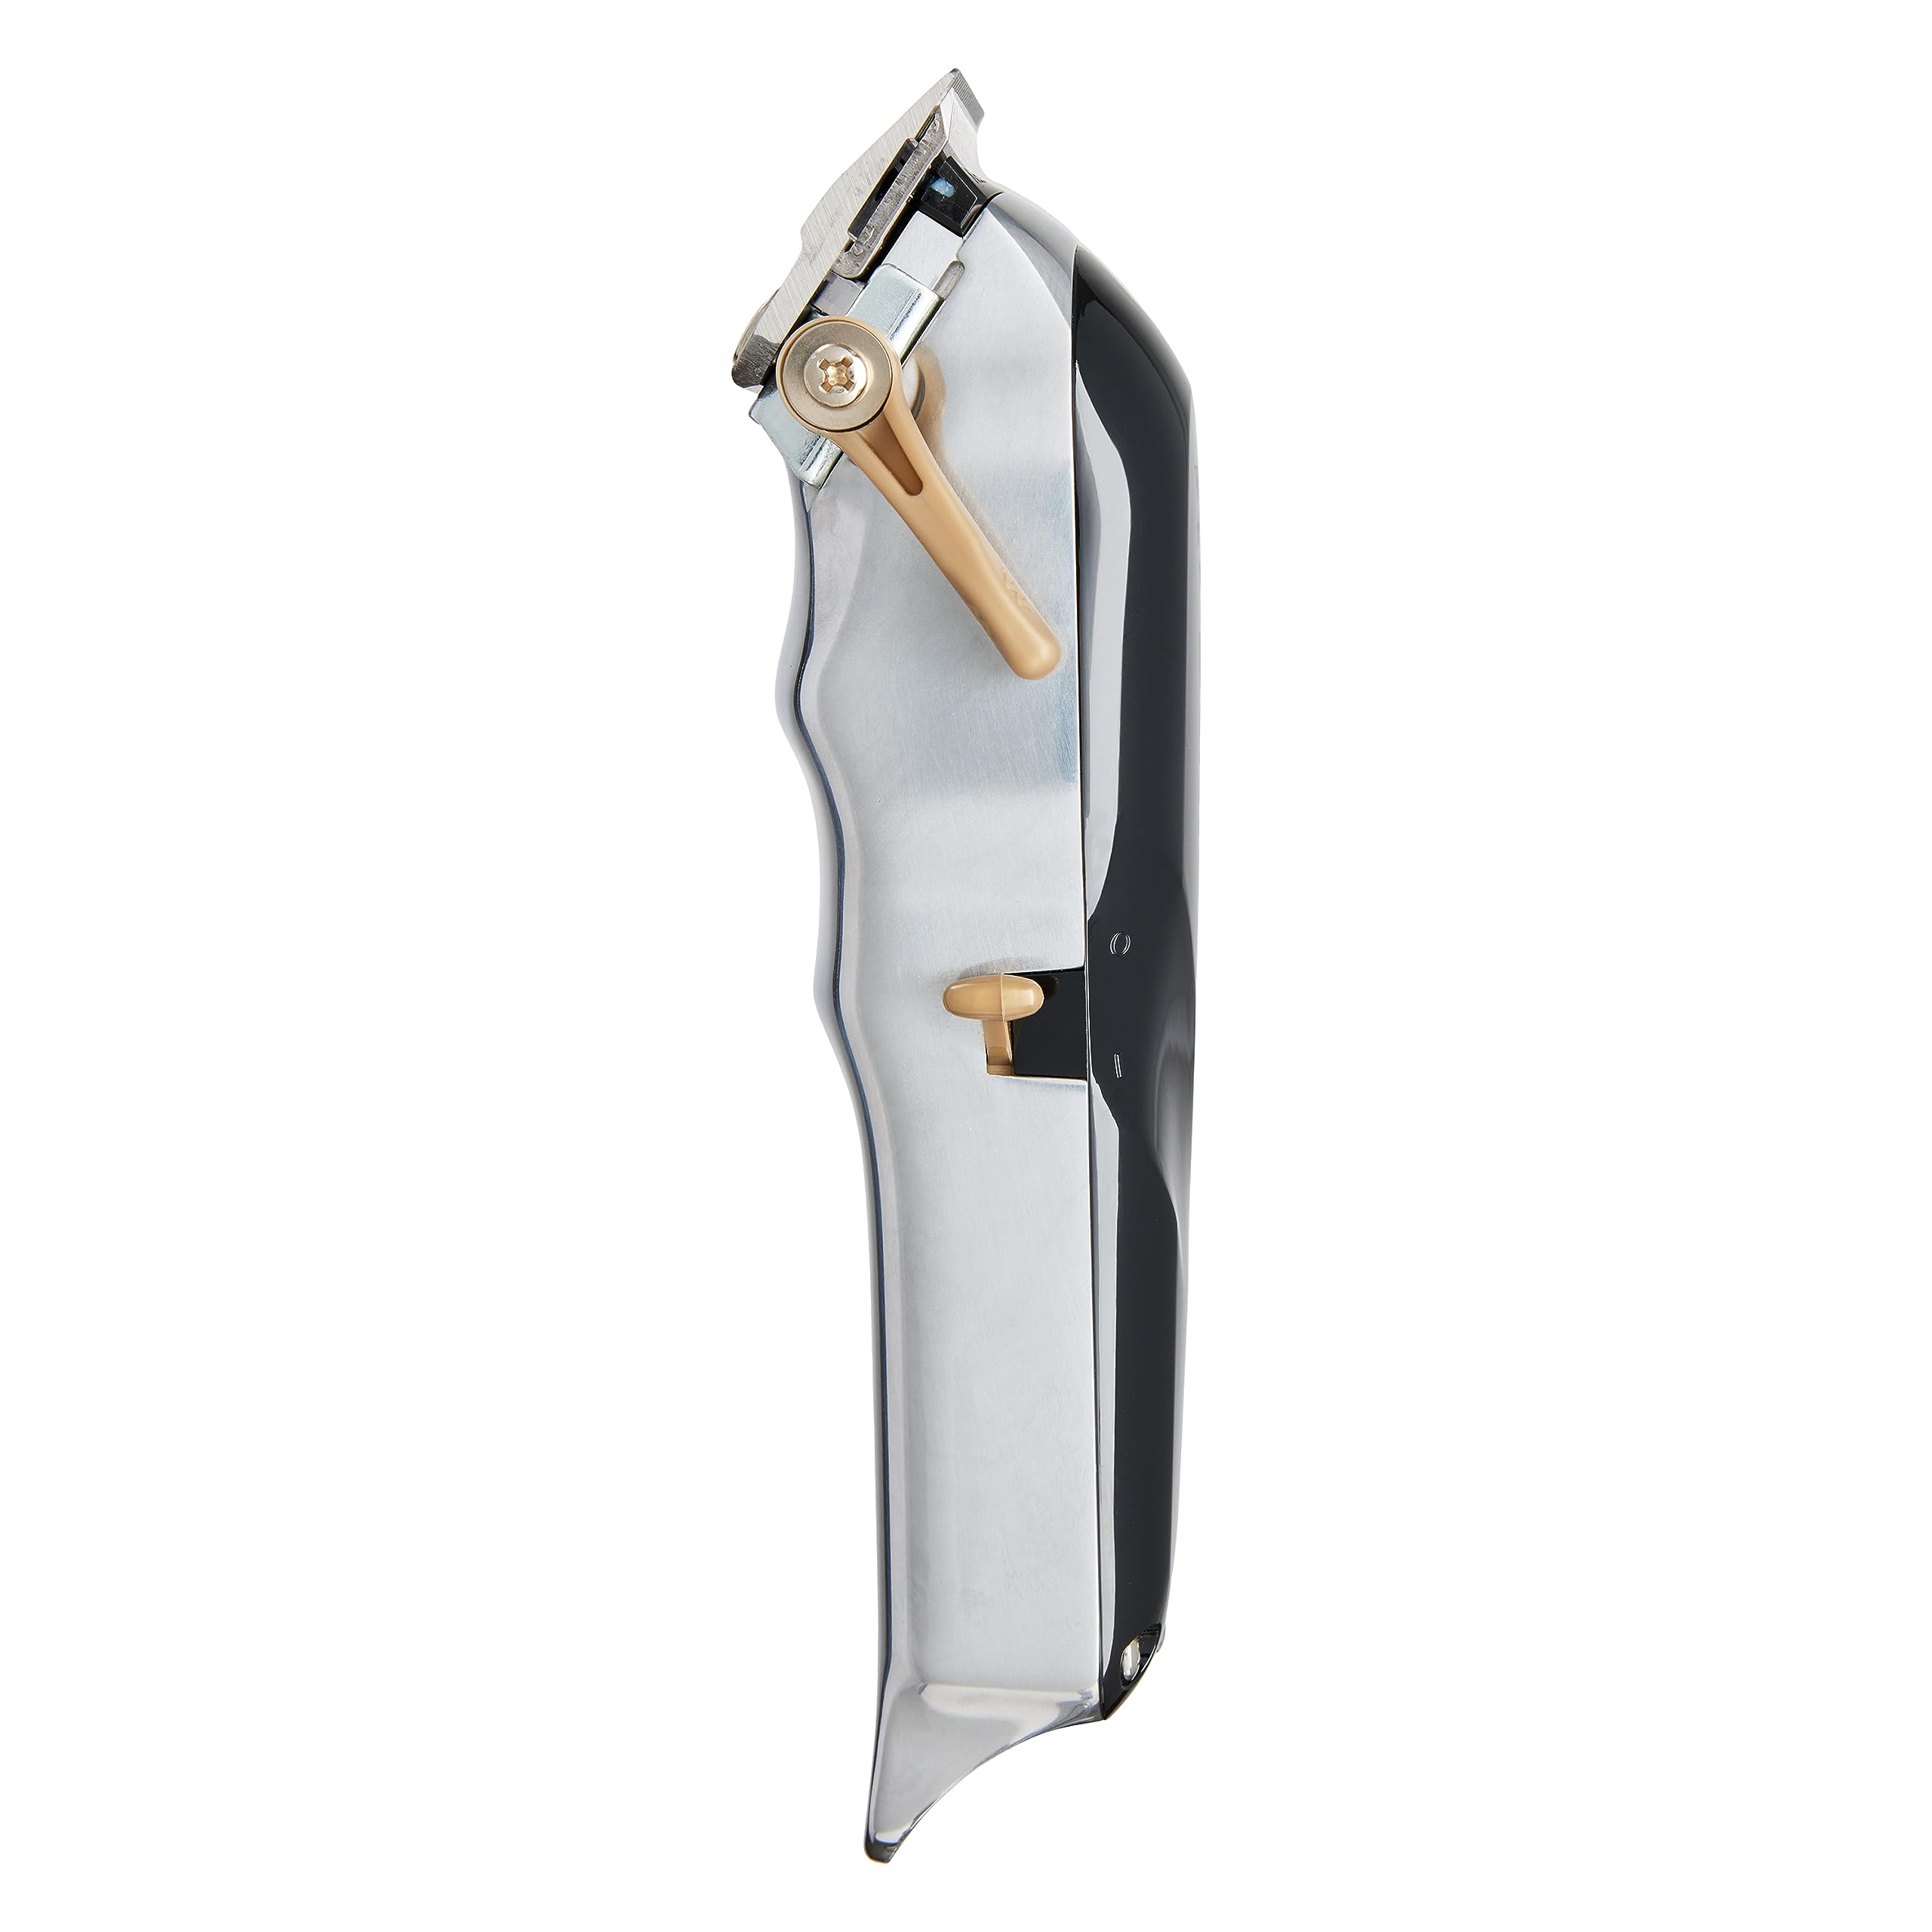 Wahl Professional - 5-Star Series Cordless Senior #8504-400 - 70 Minute Run Time - Includes Weighted Cordless Clipper Charging Stand #3801 - for Professional Barbers and Stylists